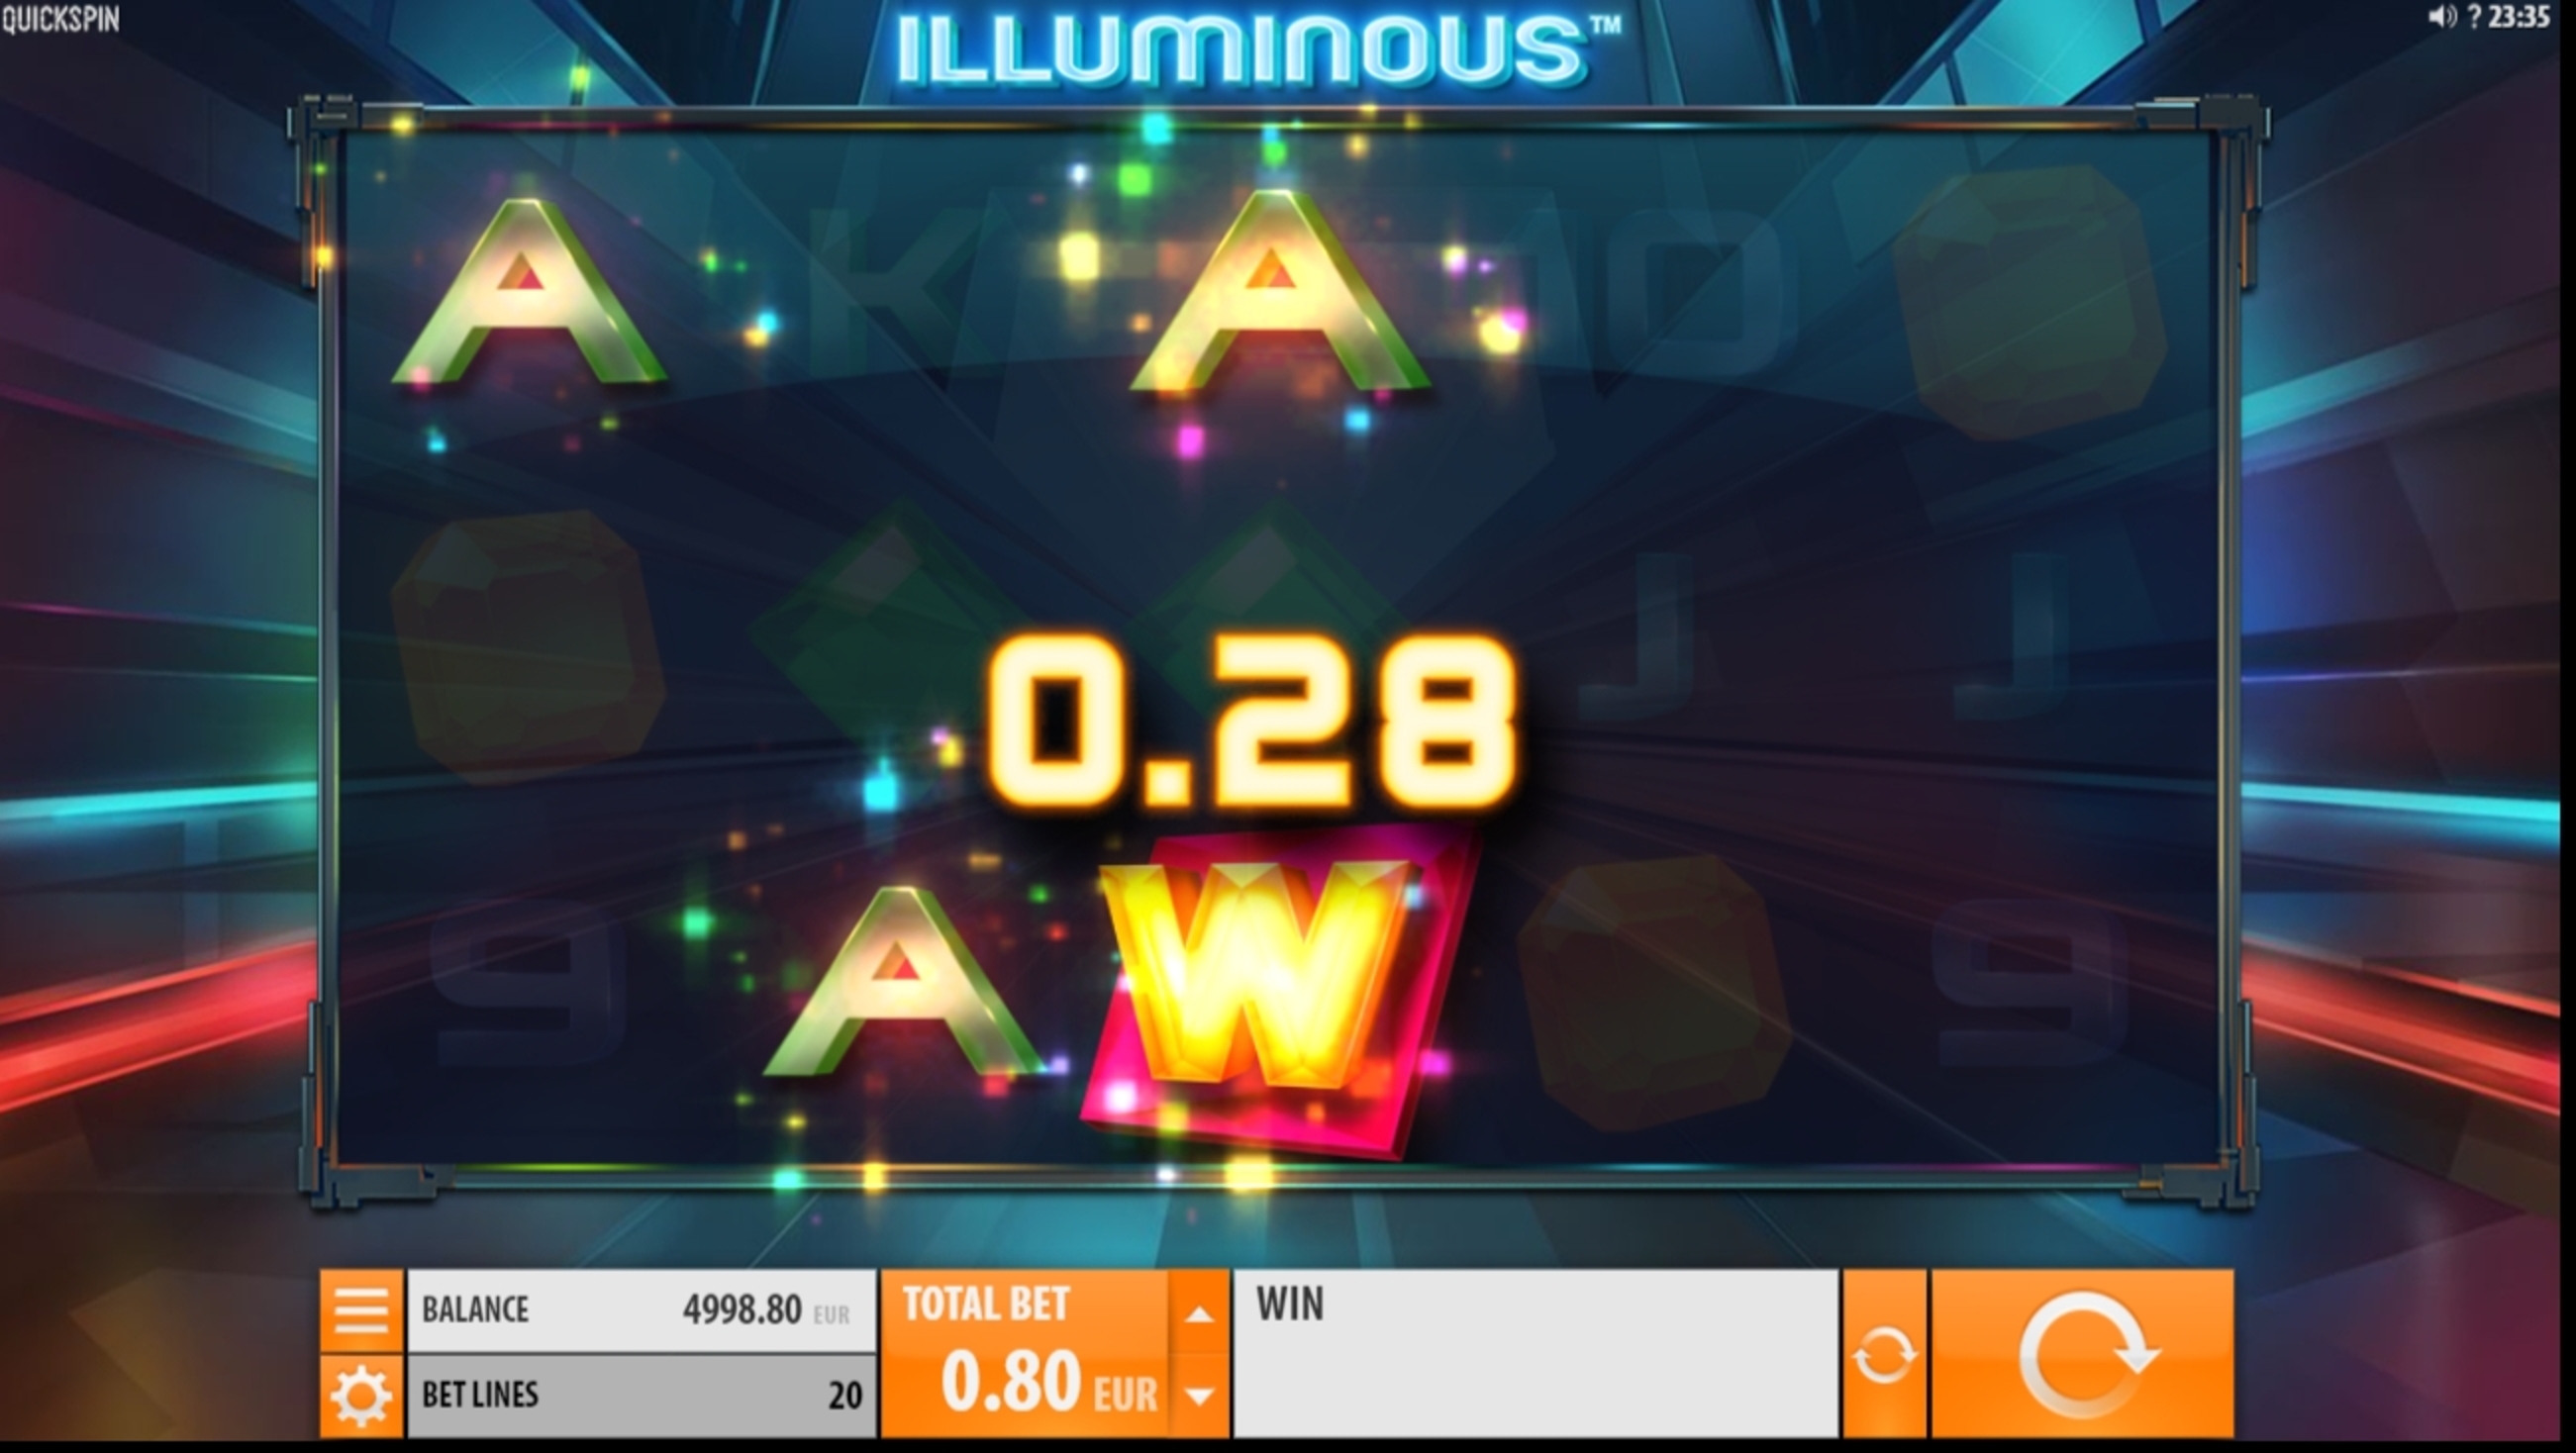 Win Money in Illuminous Free Slot Game by Quickspin